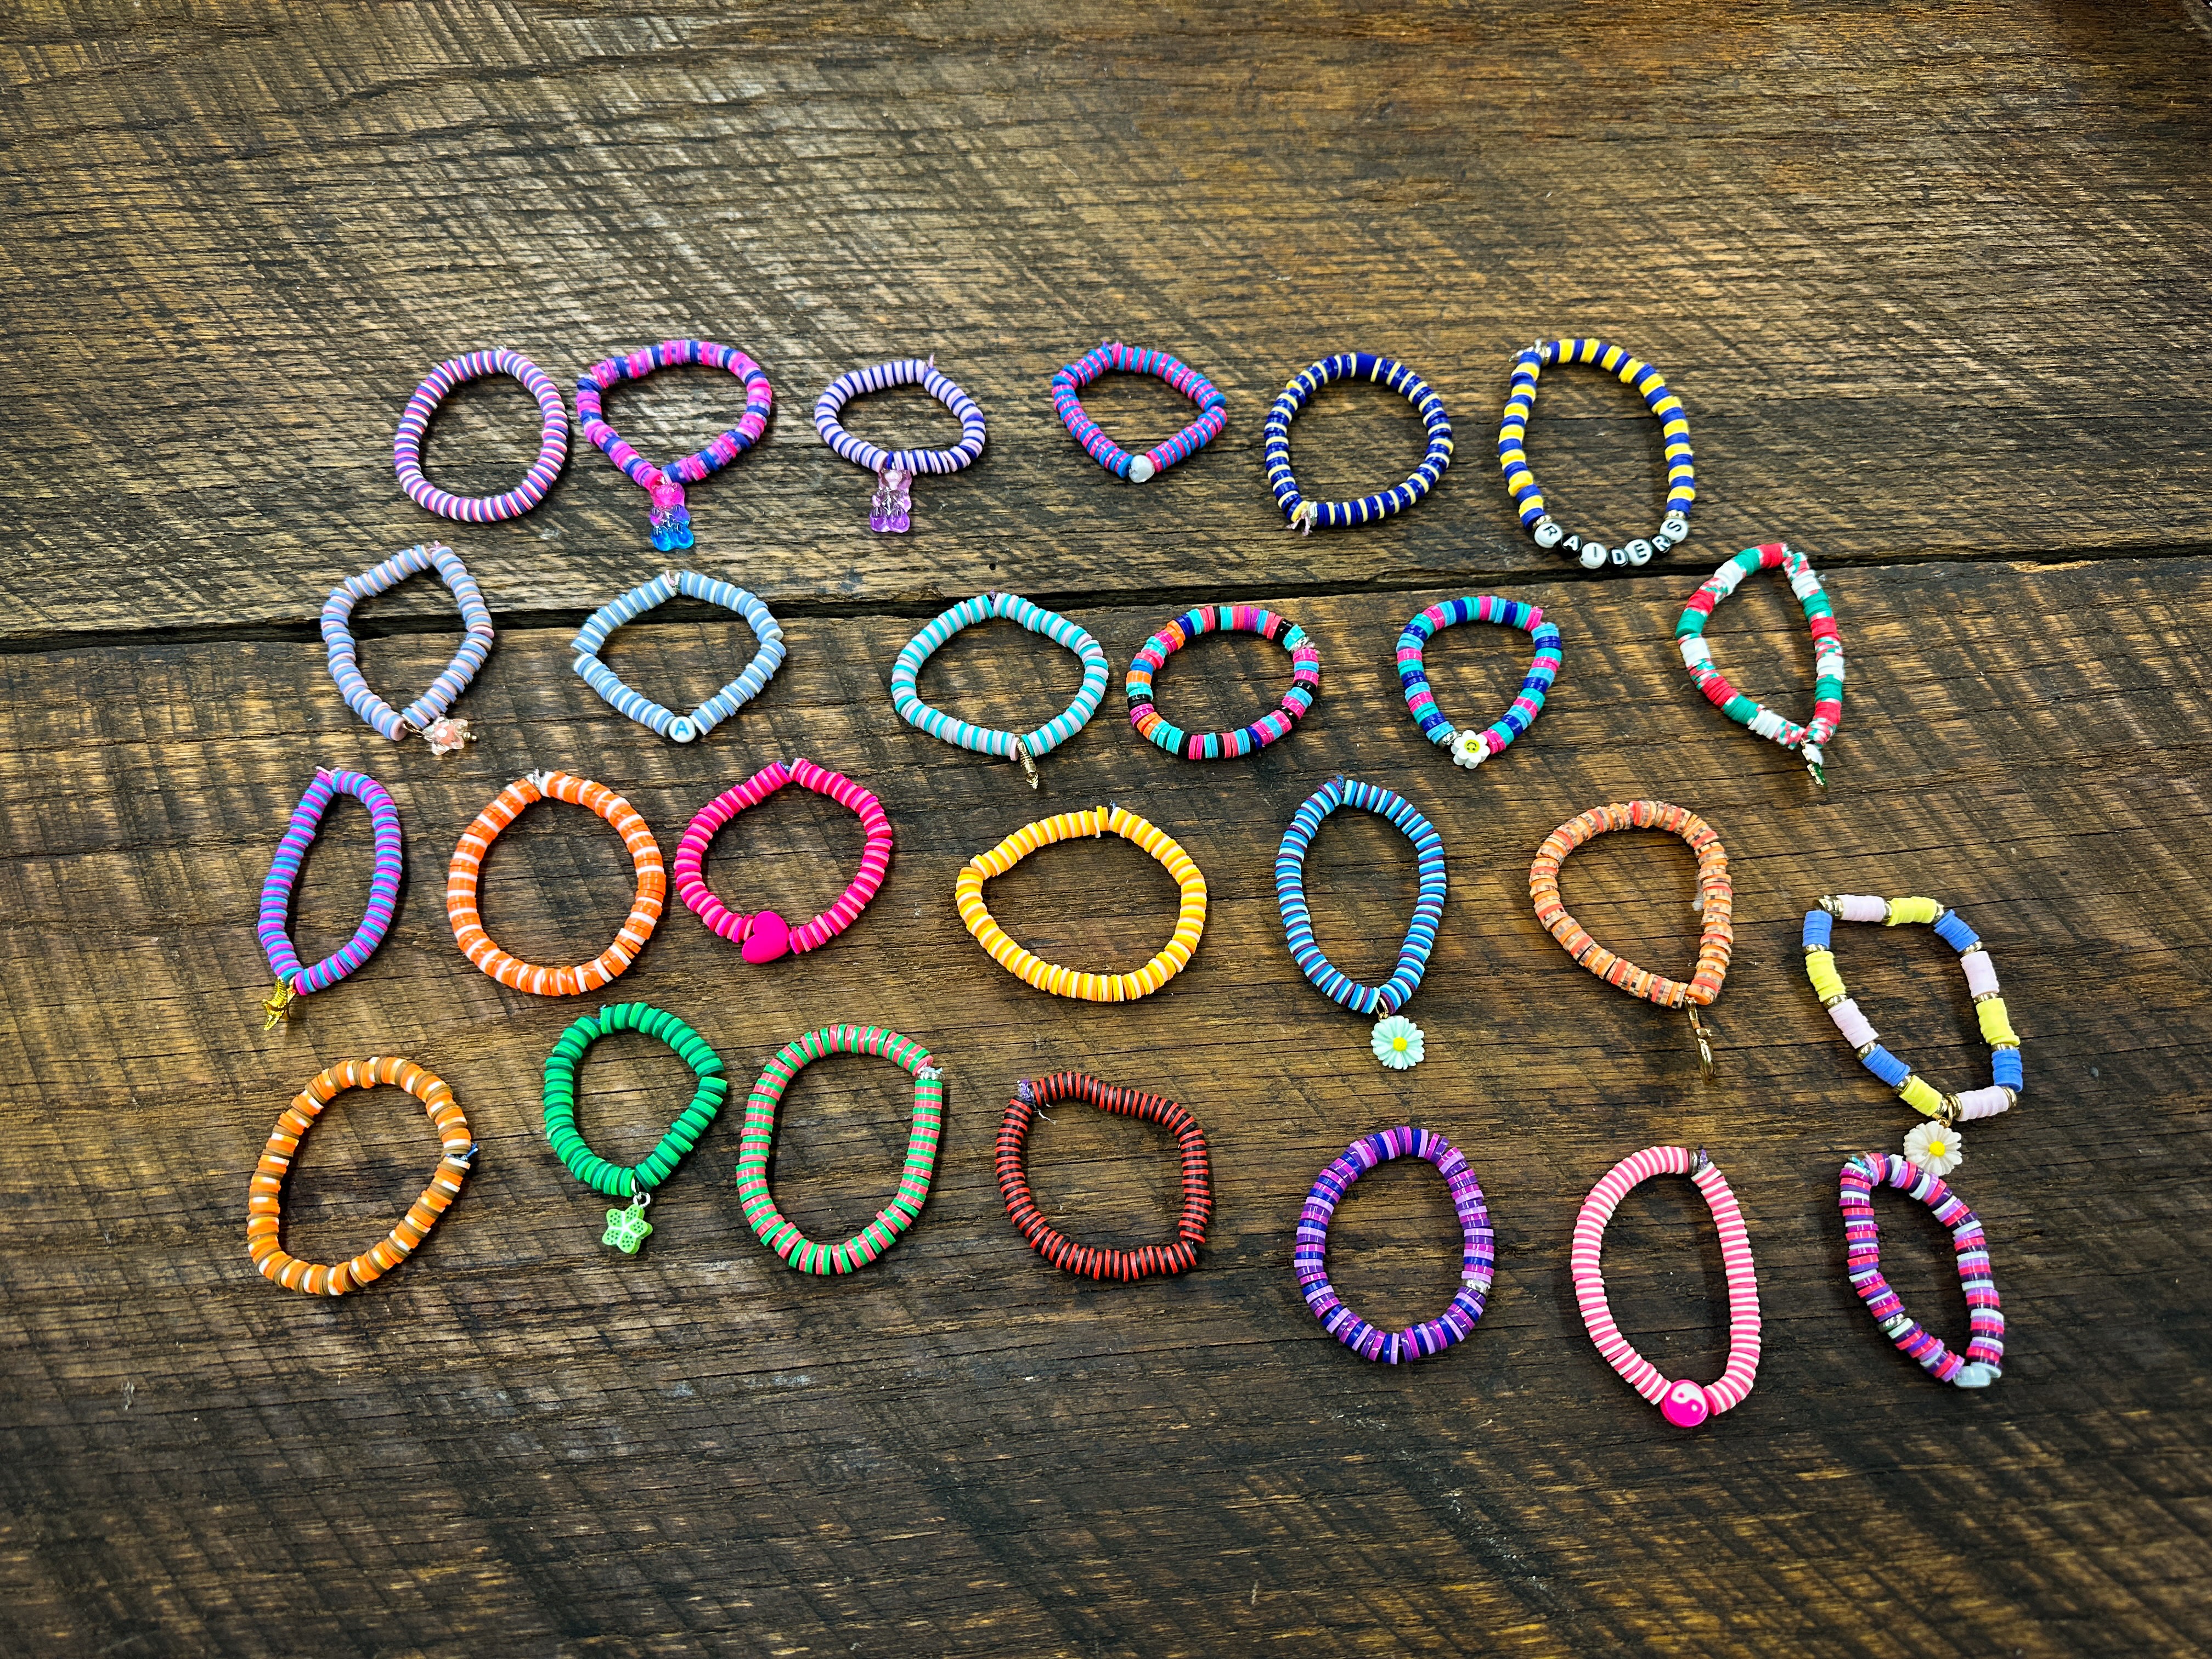 Sunlets - Bracelets by Addison to Support Riley Children's Hospital - Shipped